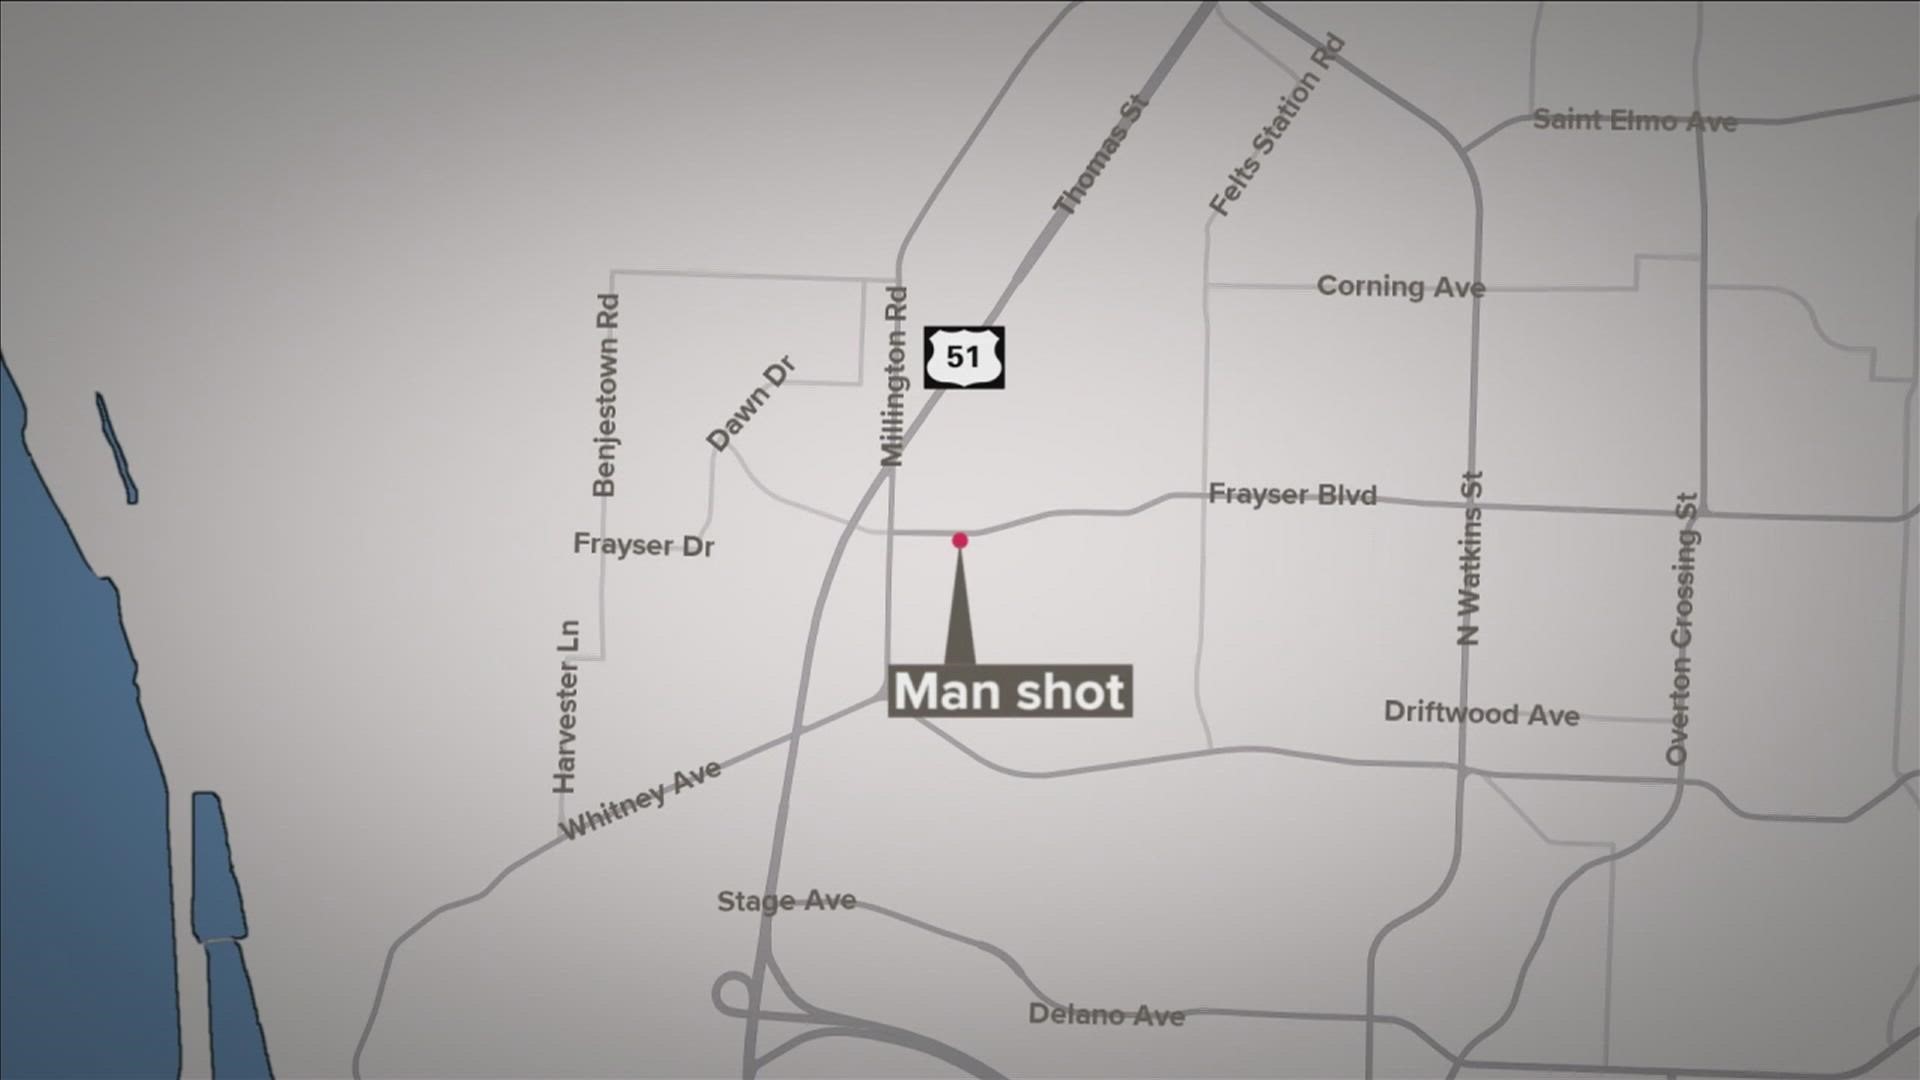 MPD officers responded to the shooting about 10:15 p.m. Tuesday in the 1100 block of Frayser Blvd. near Millington Rd.